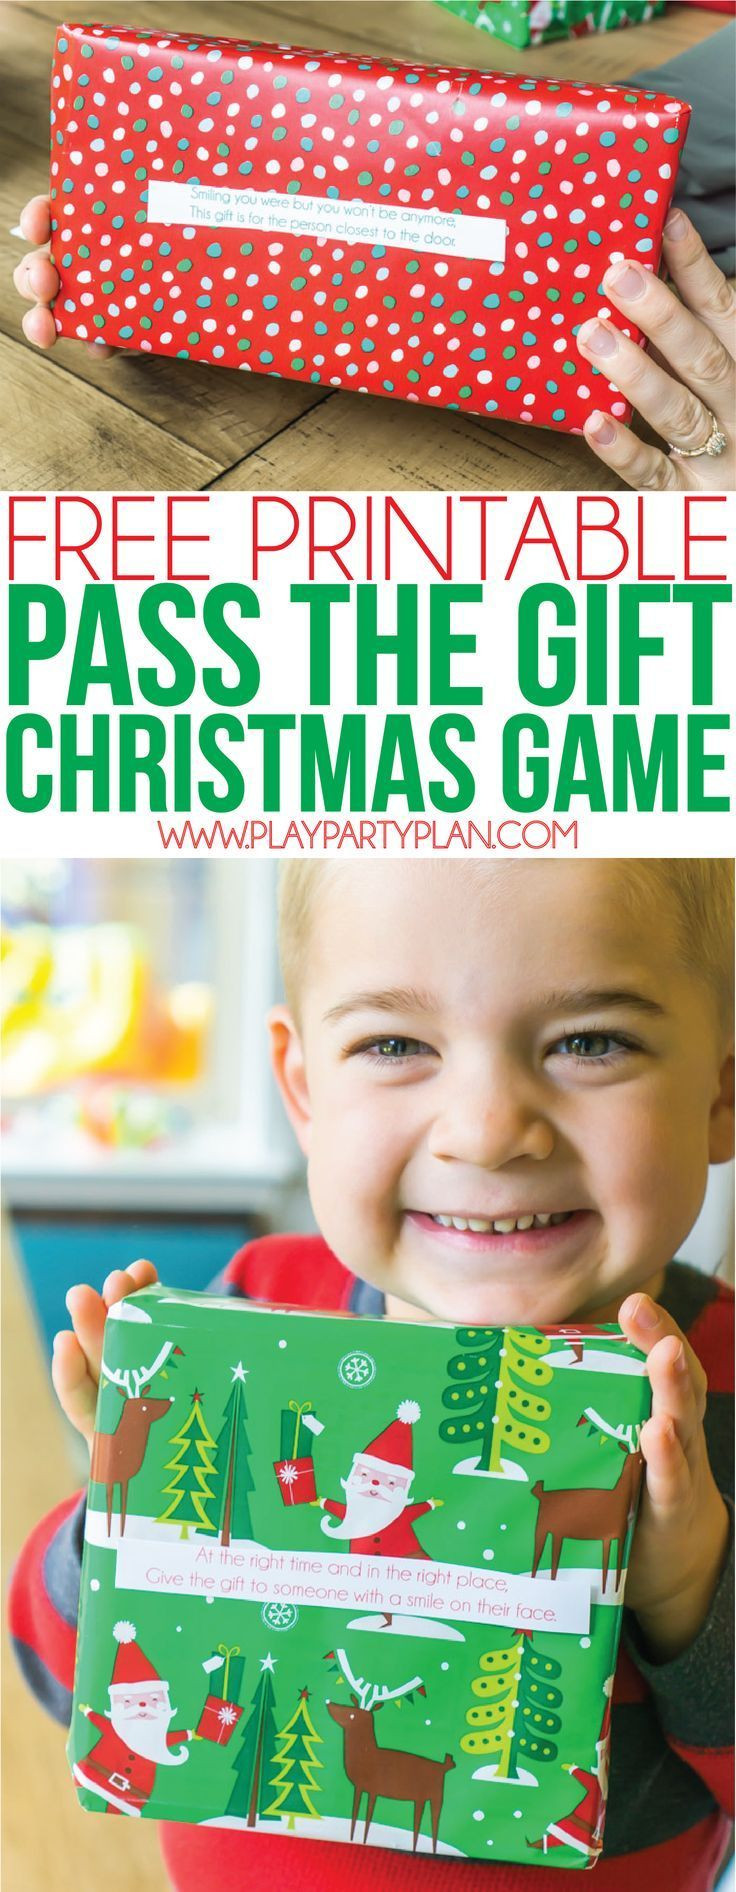 Holiday Party Game Ideas For Work
 The 25 best fice christmas party games ideas on